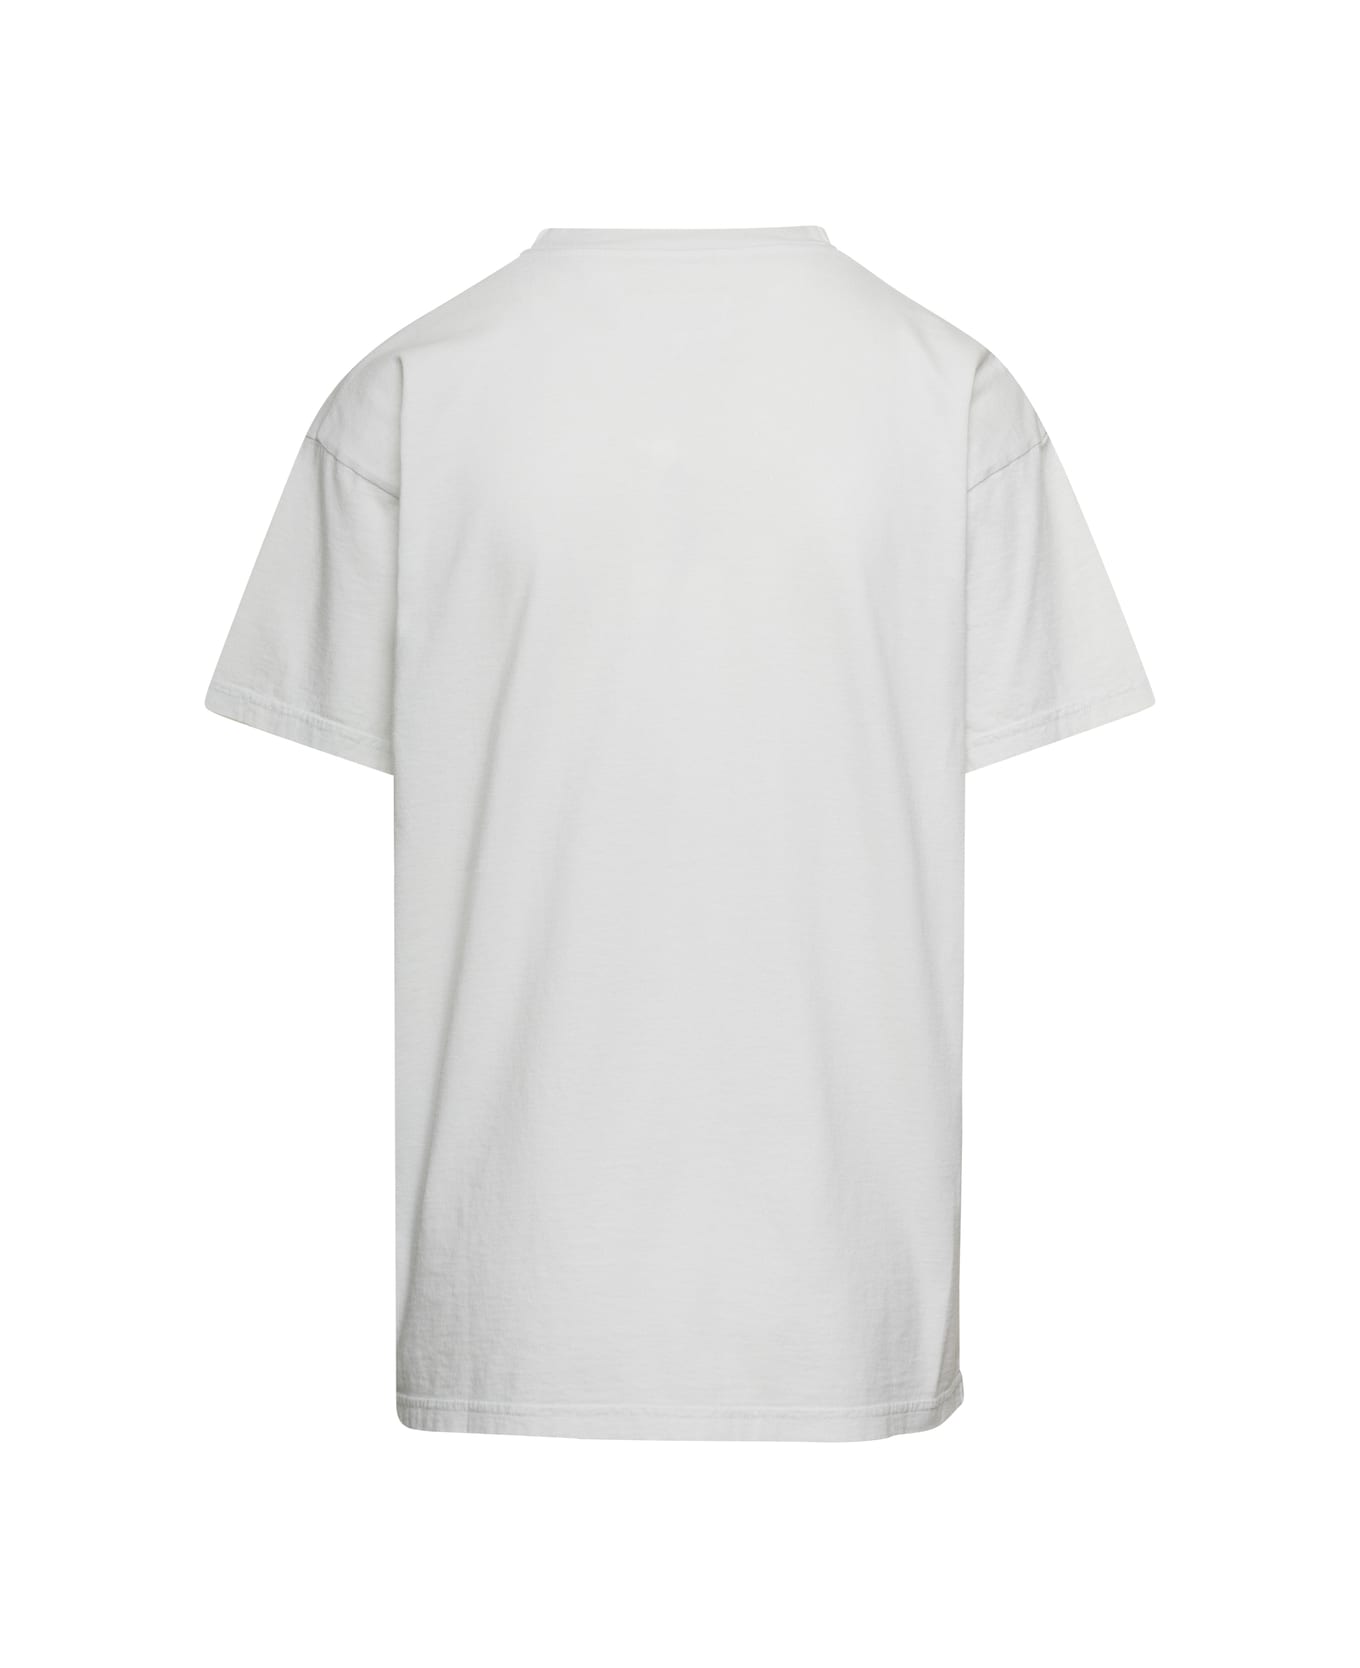 Maison Margiela White T-shirt With Printed Logo On The Front In Cotton Woman - White